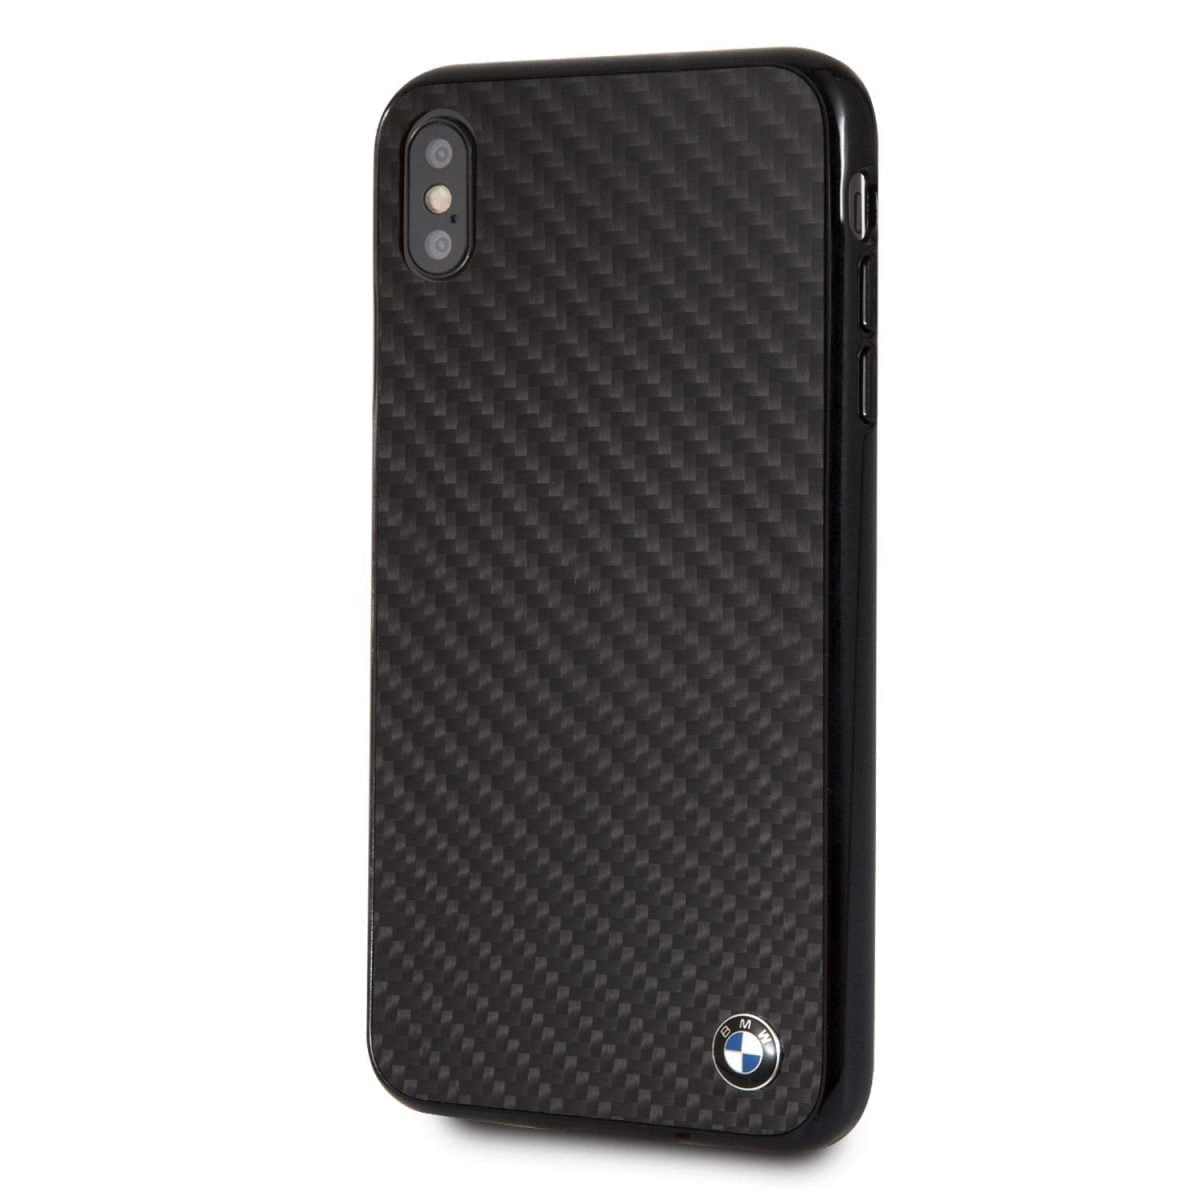 Cg Mobile Bmw Iphone Xs Max Case Black Carbon Hard Cell Phone Case Carbon Fiber Easily Accessible Ports Officially Licensed 01 Iphone Case Iphone Xs Max Black Carbon Fiber (Bmw)